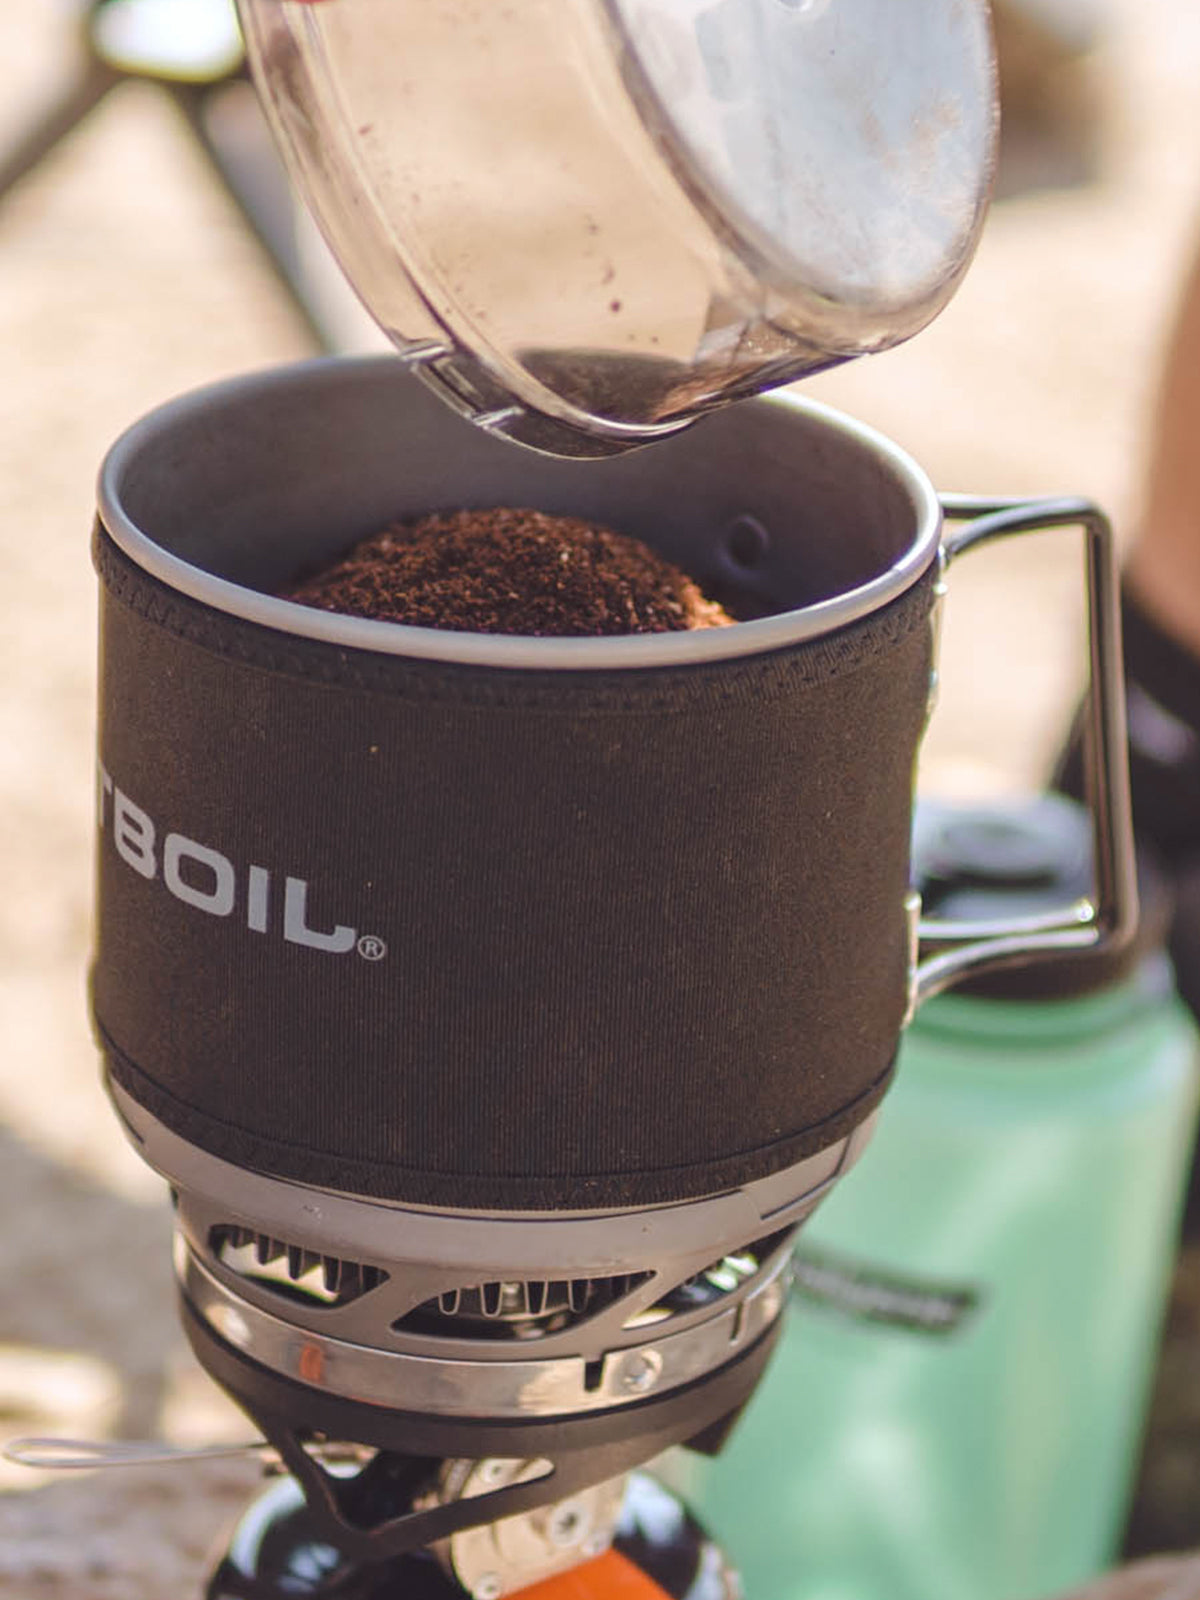 Jetboil MINIMO with coffee in